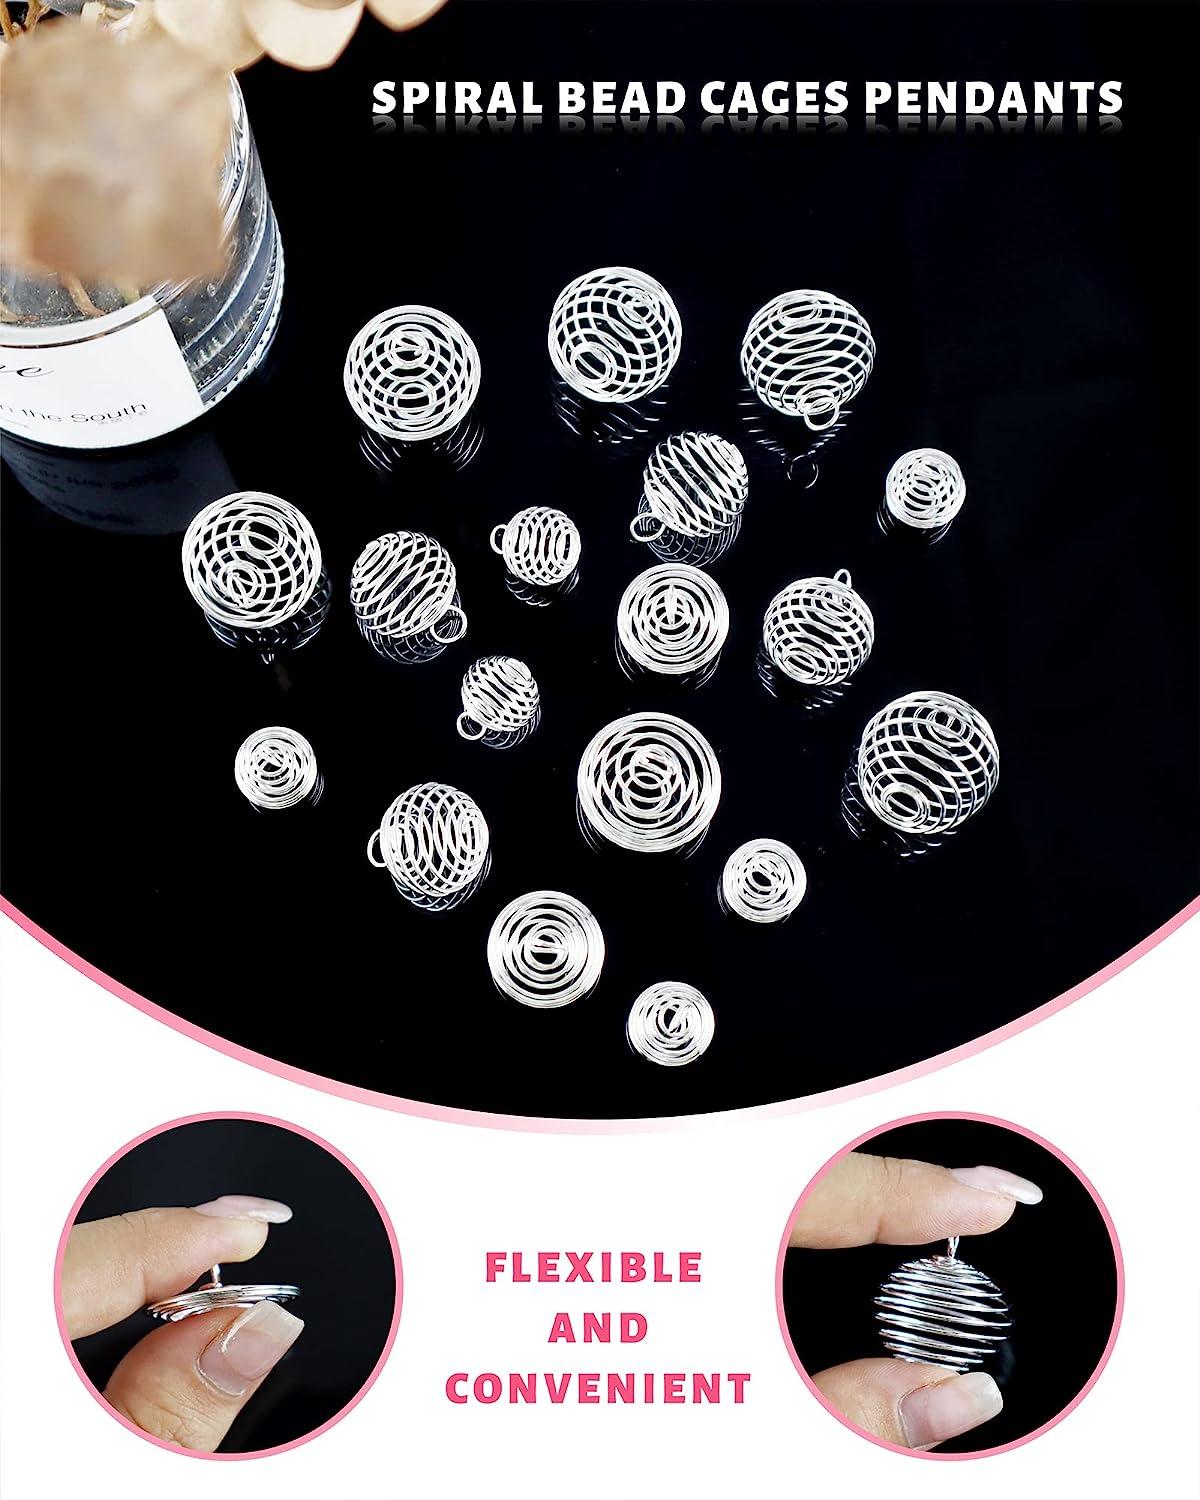 JIALEEY Spiral Bead Cages Pendants 30 PCs 3 Sizes Silver Plated Stone  Holder Necklace Cage Pendants Findings for Jewelry Making and Crafting